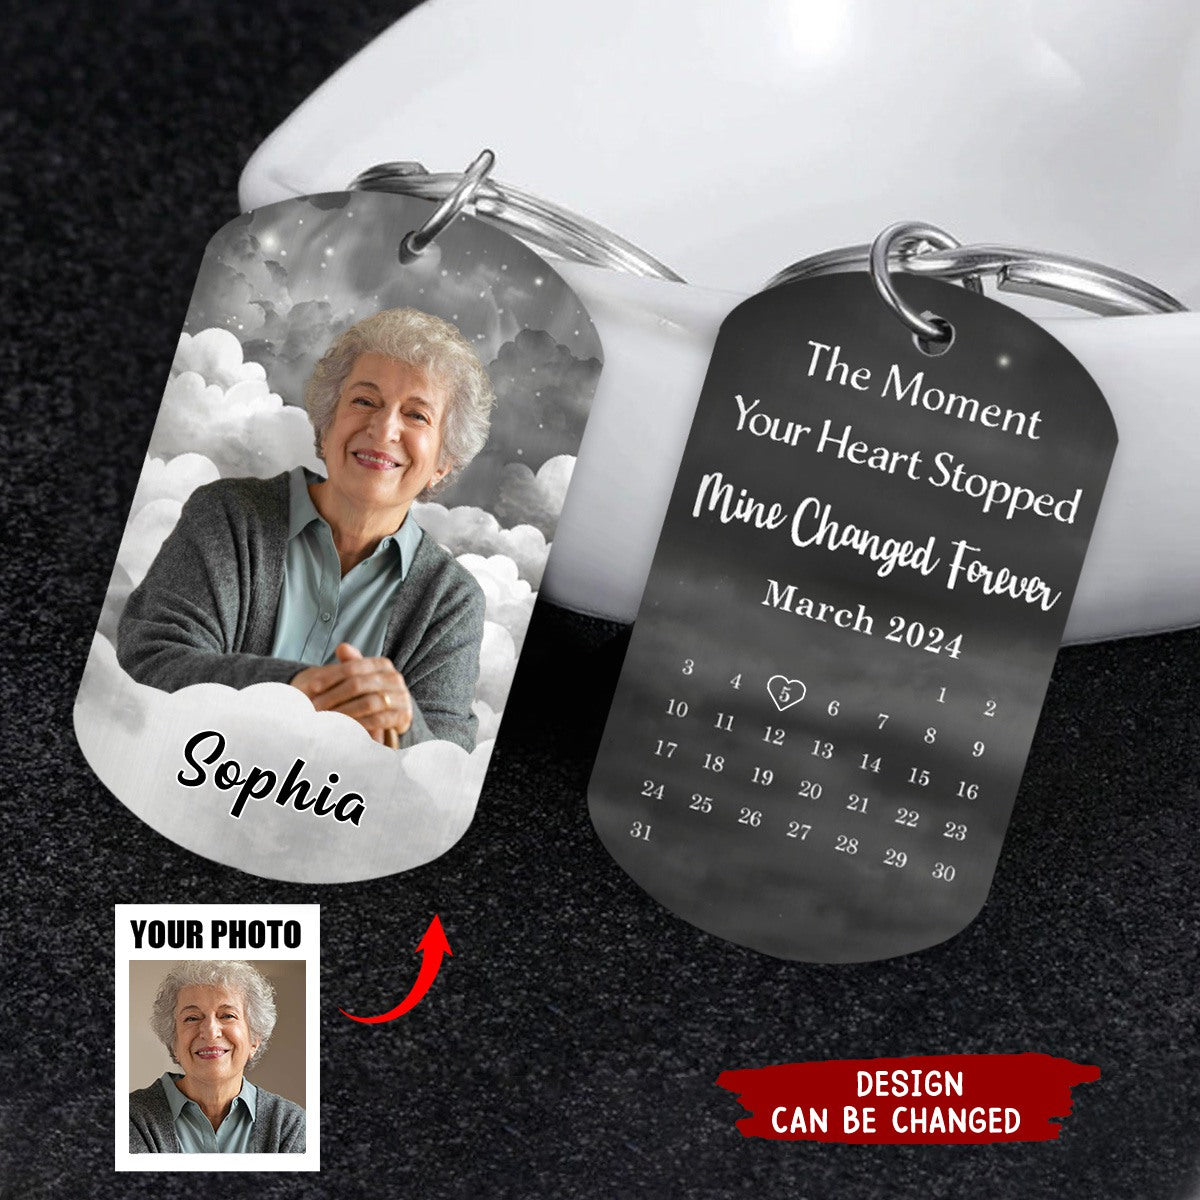 The Moment Your Heart Stopped - Personalized Stainless Steel Keychain